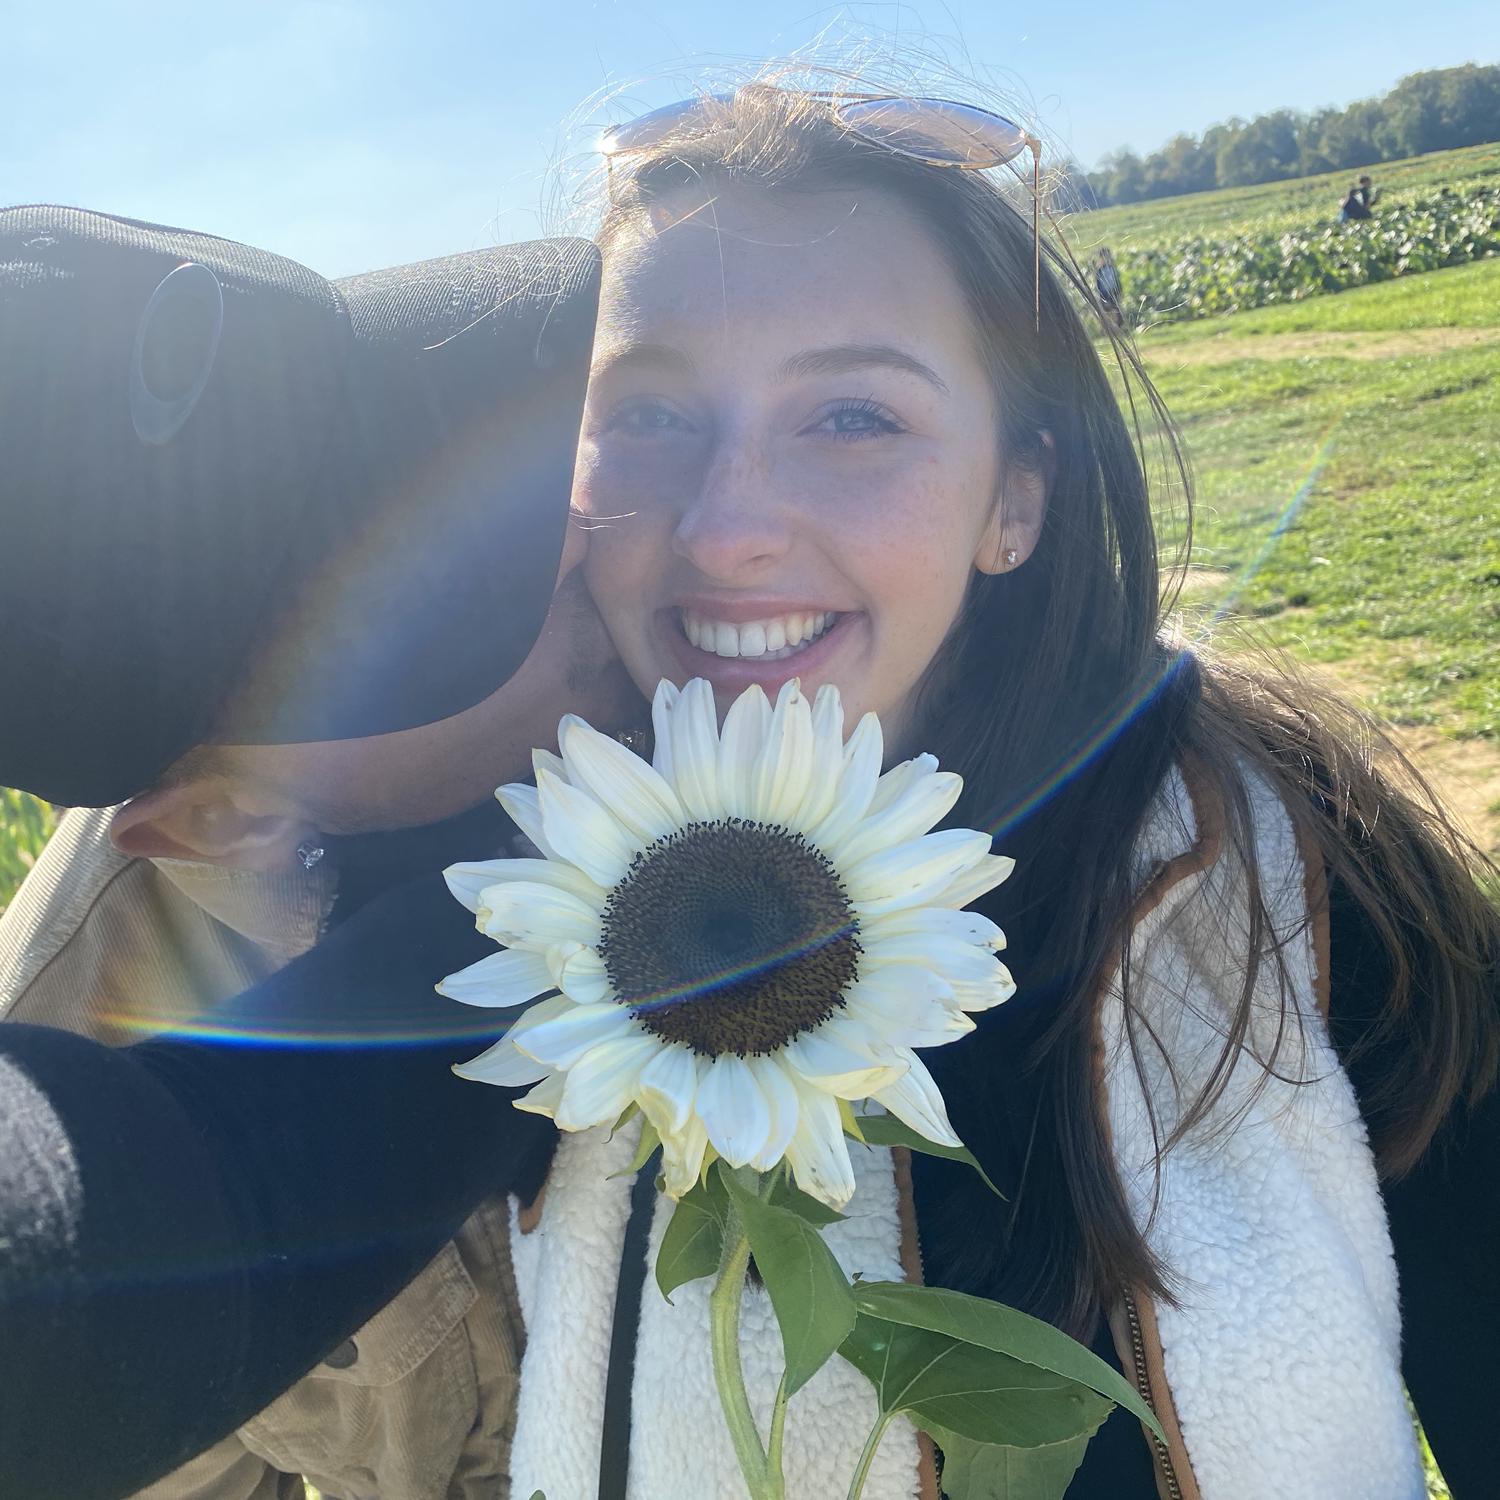 Flower picking, the rainbow was absolutely perfect!